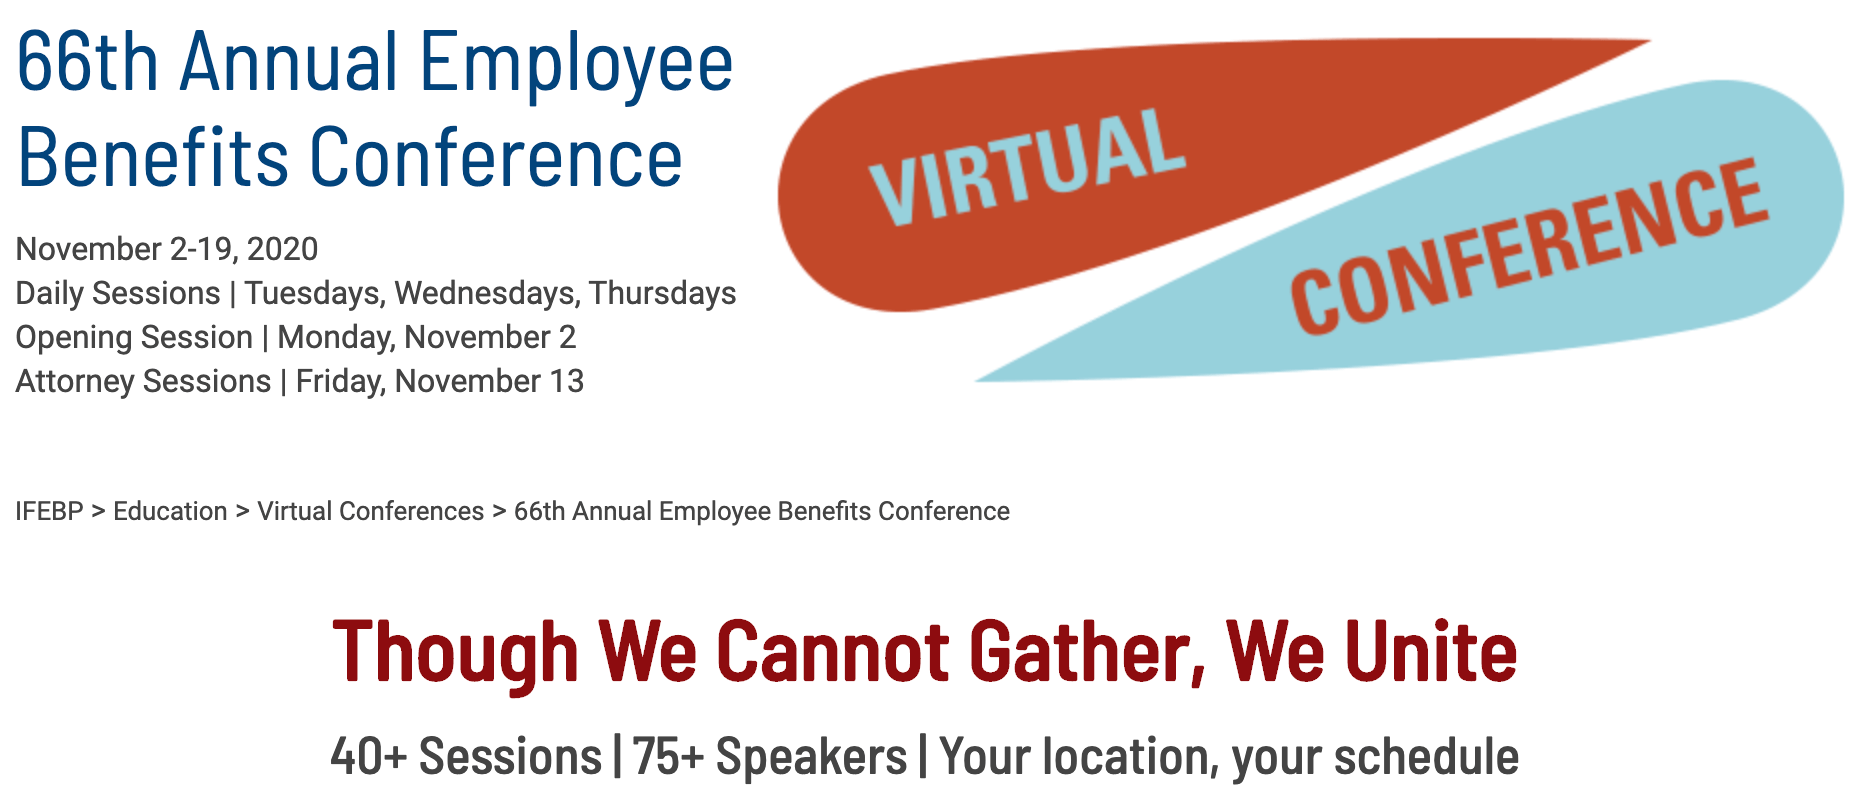 Tune in for the 66th Annual Employee Benefits Virtual Conference